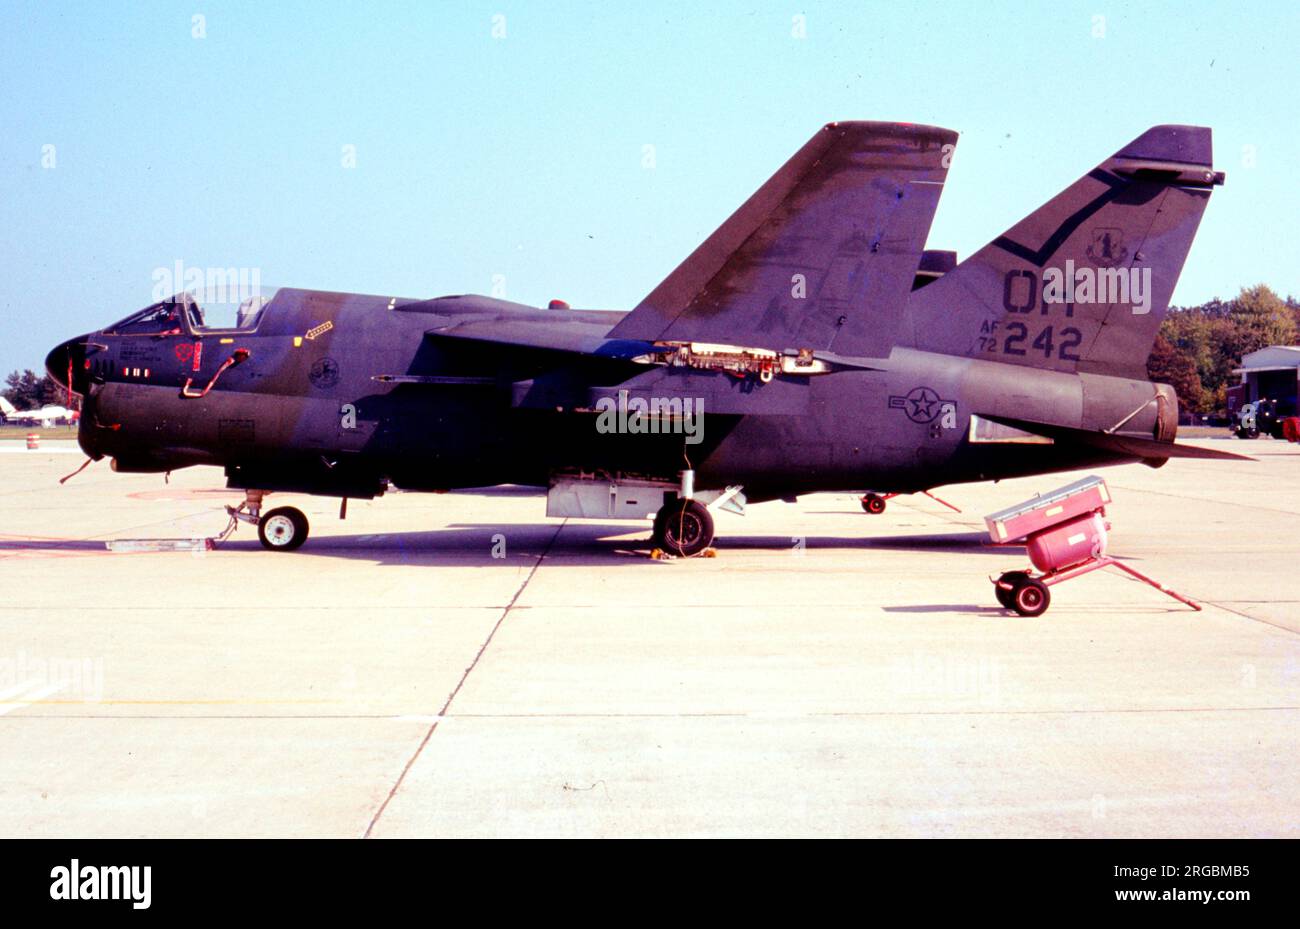 United States Air Force (USAF) - Ling-Temco-Vought A-7D-13-CV Corsair II 72-0242 (msn D-364) der Ohio ANG, 162. TFS (178. TFG). Stockfoto